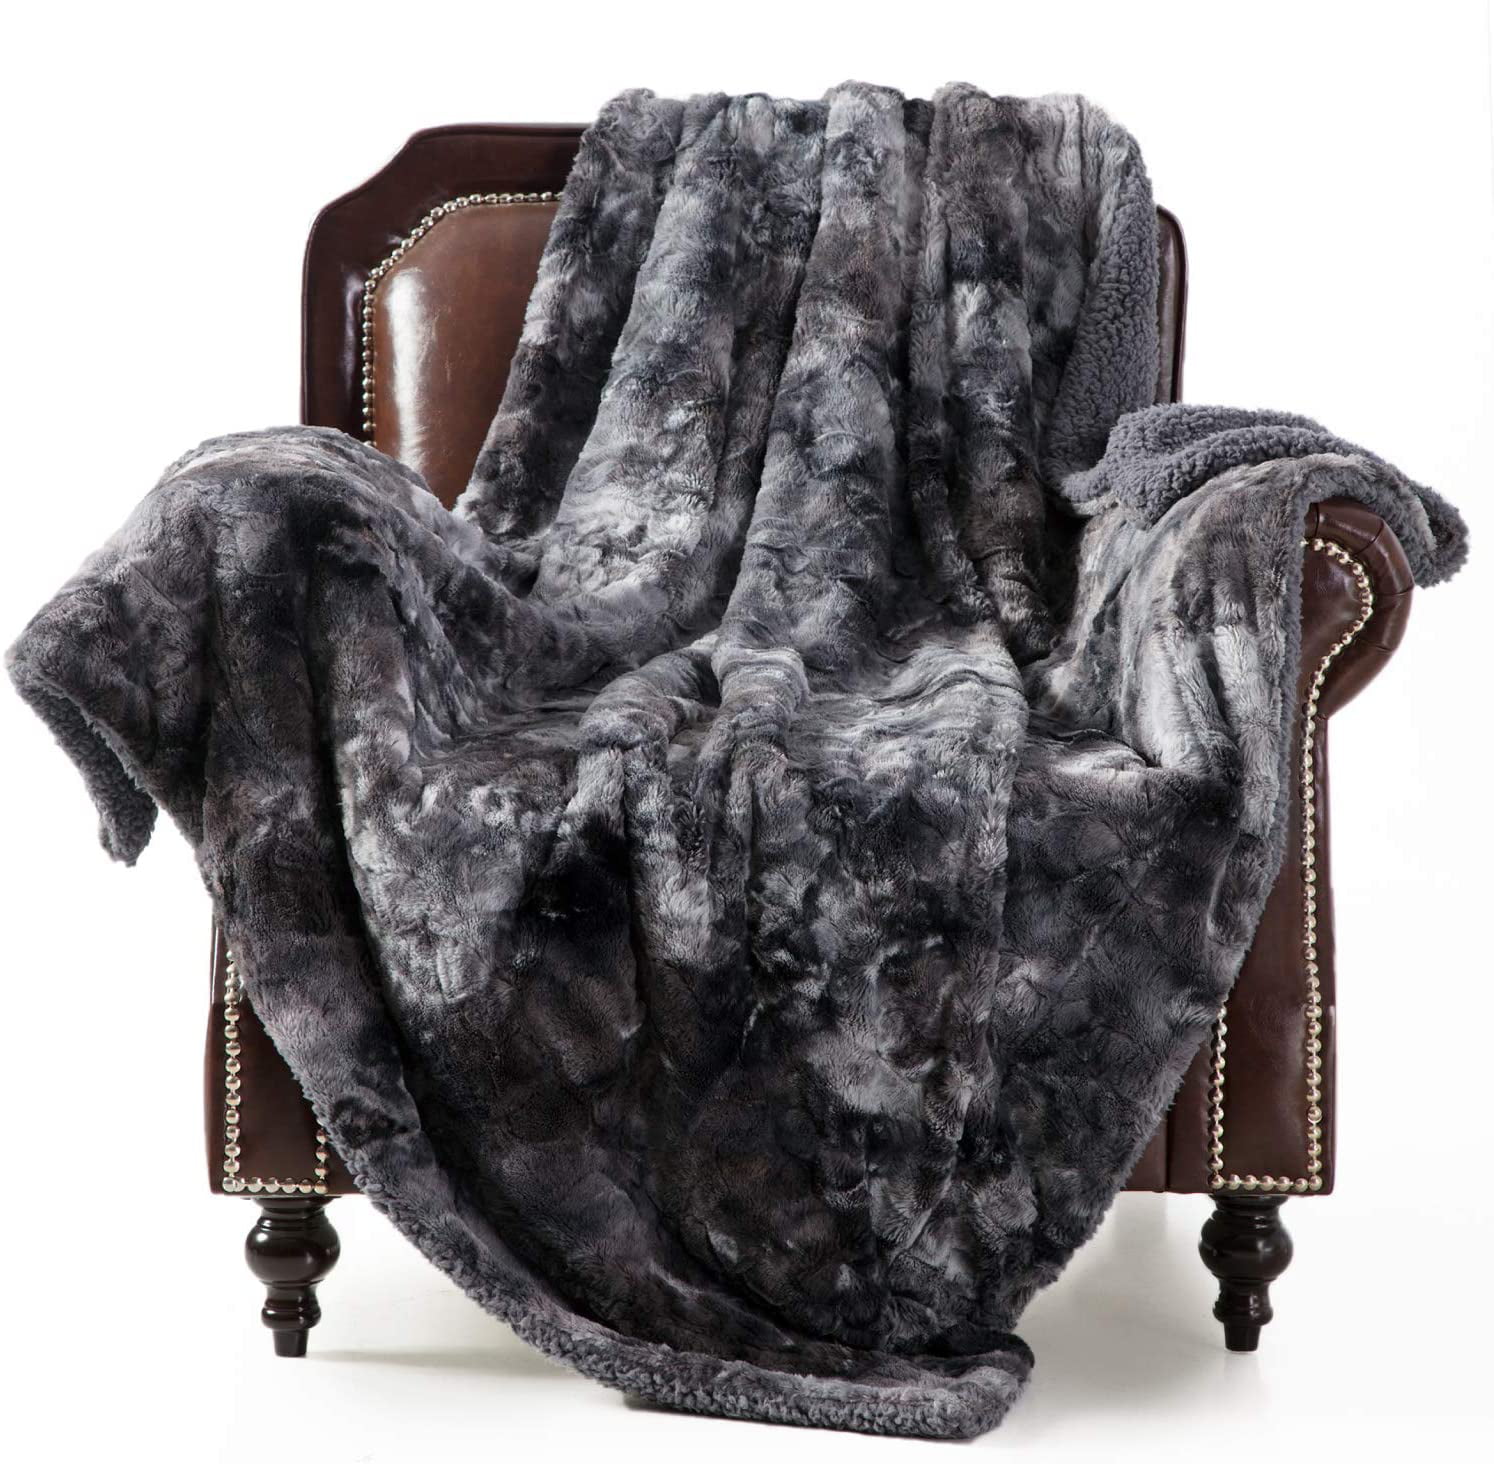 Bohemian Soft Plush Flannel Blanket Throws Fuzzy Microfiber for Bed/Couch/Sofa/Office/Camping Flannel Sherpa Throw Black Monster with Eye 43.5'' x 60''